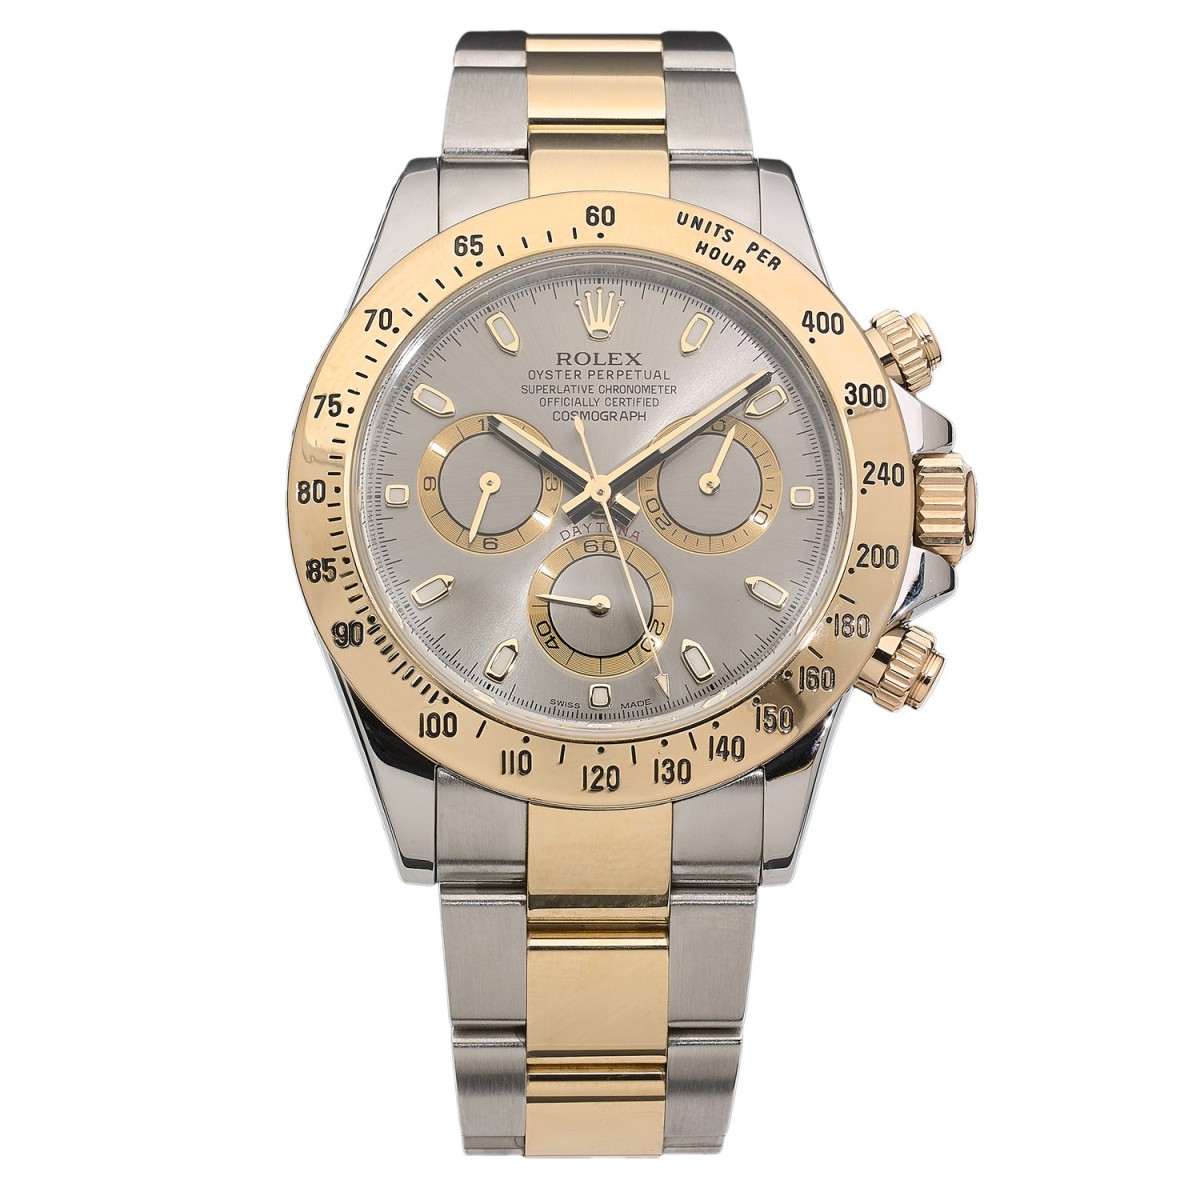 montre rolex oyster perpetual superlative chronometer officially certified cosmograph